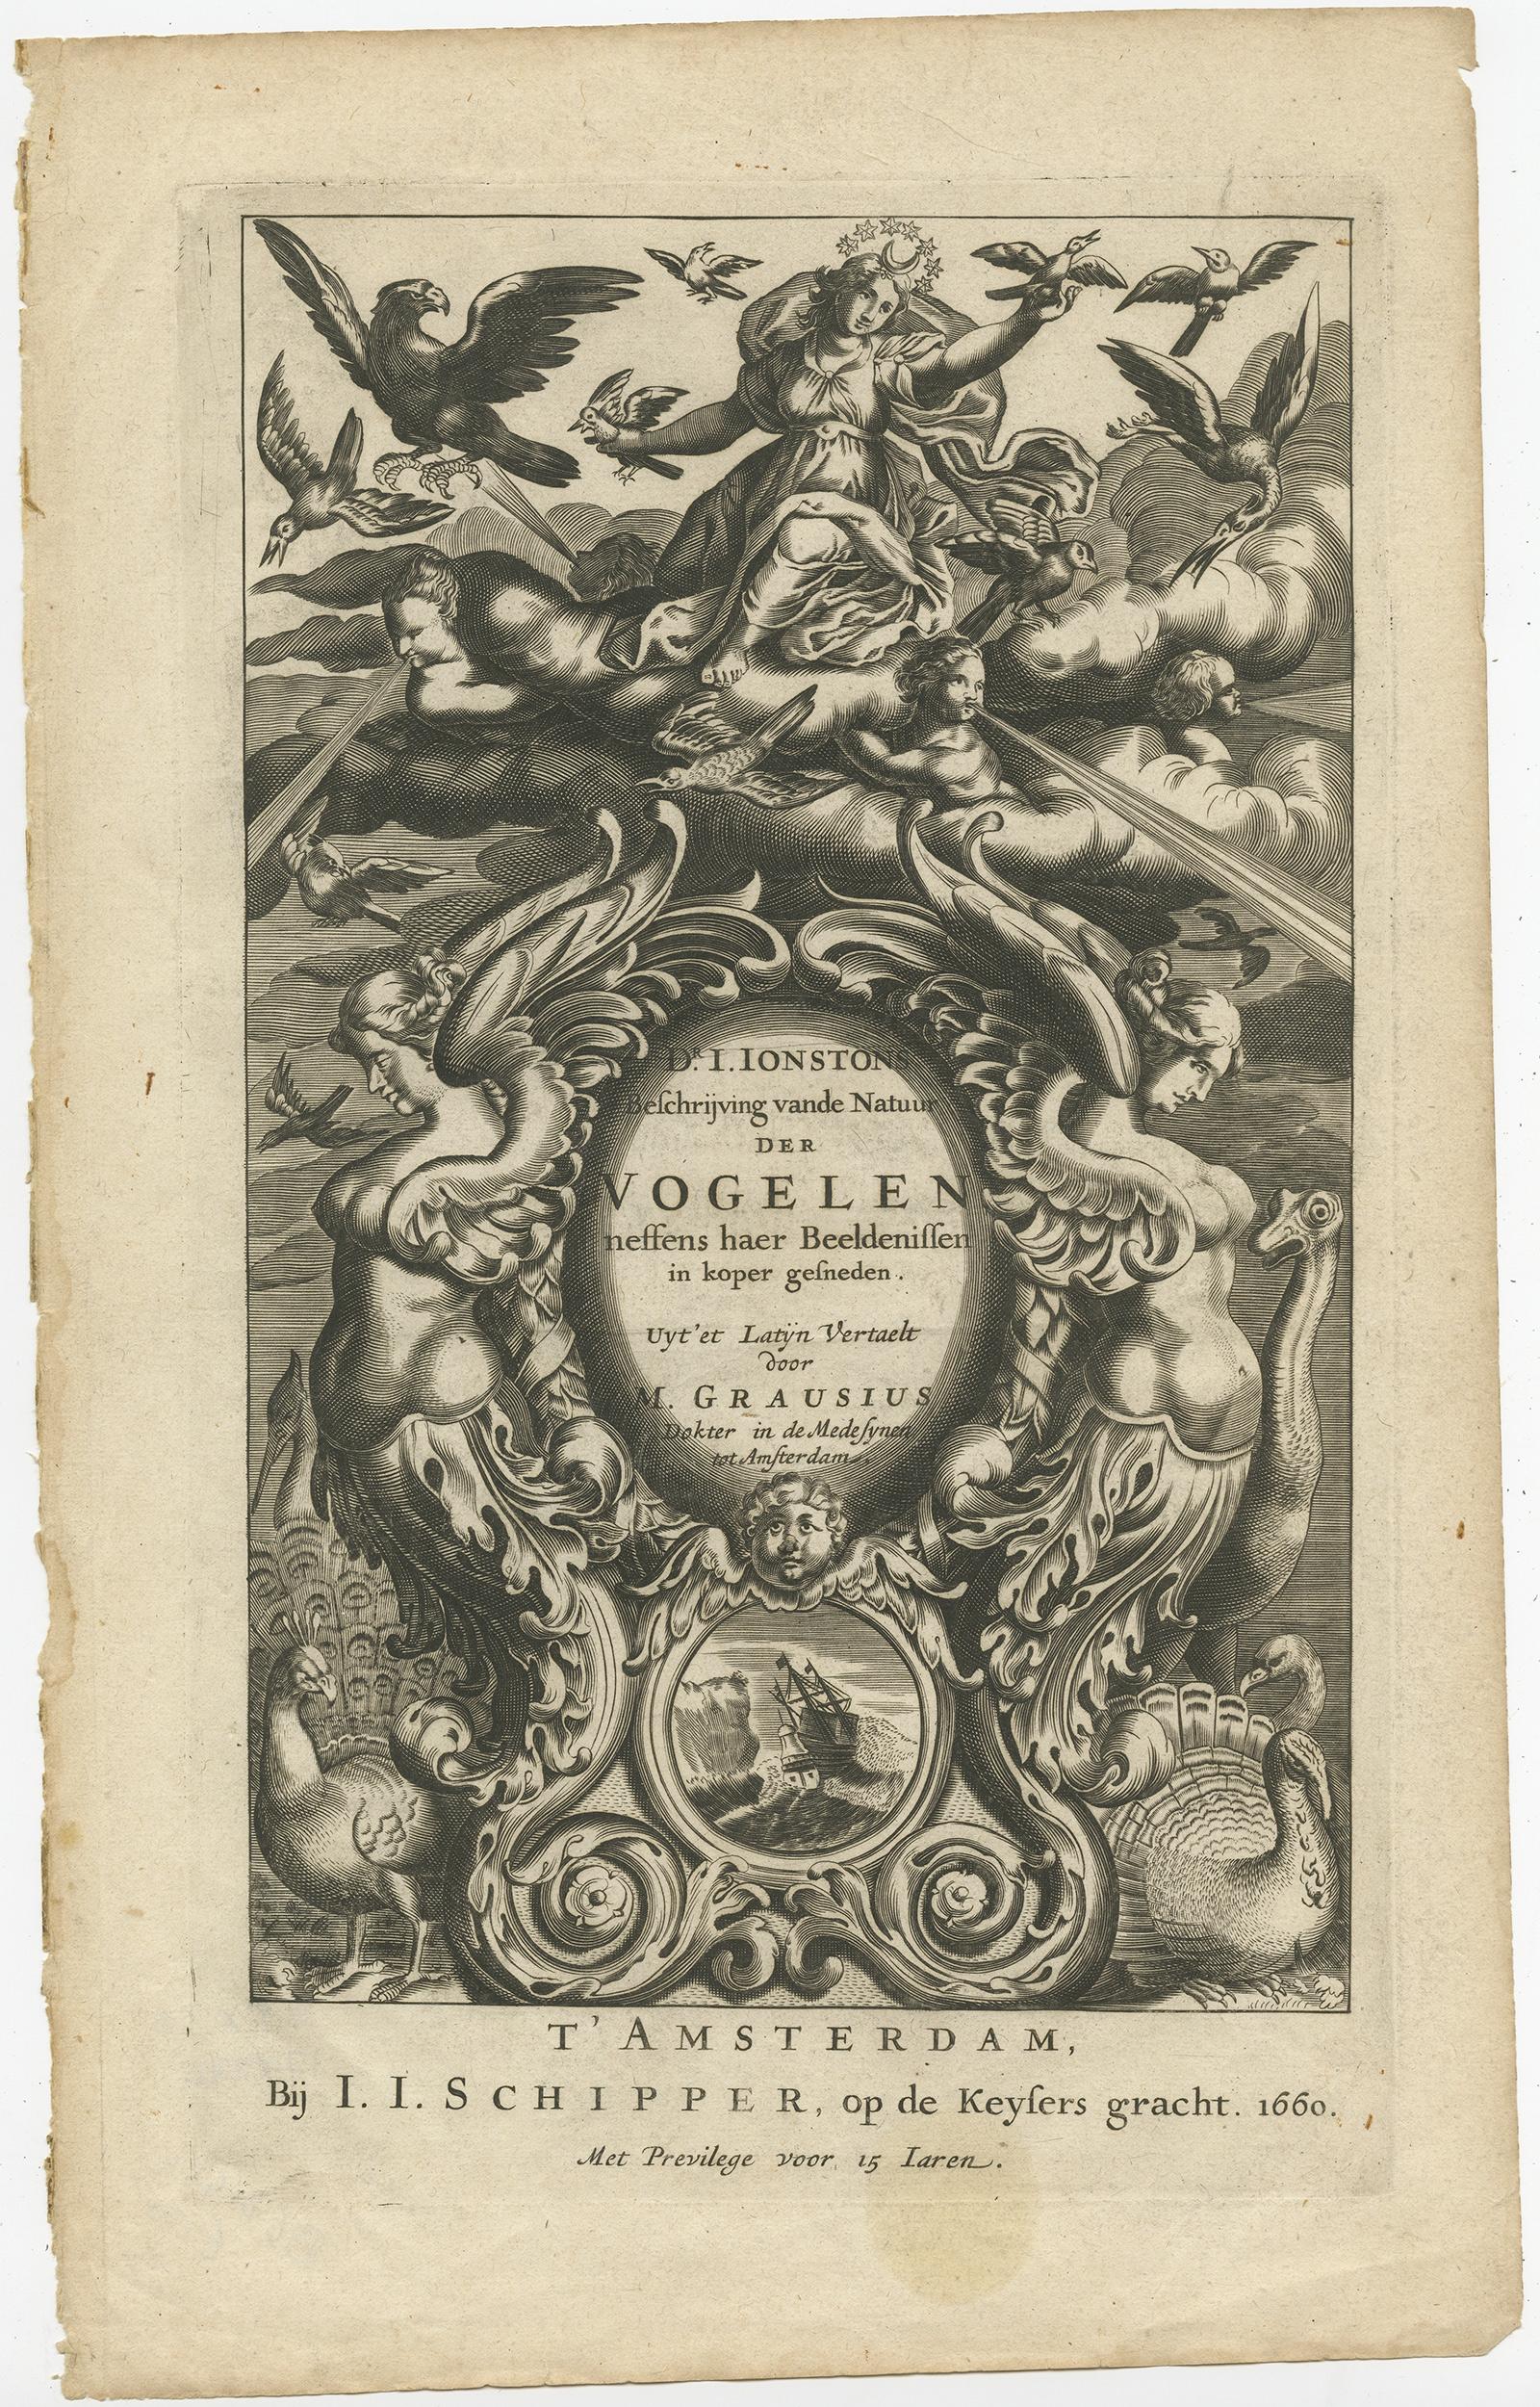 Antique print titled 'Dr. J. Jonstons Beschrijving van de Natuur der Vogelen (..)'. 

Frontispiece of the Dutch edition of 'Historiae Naturalis de Avibus' by John Johnston. Translated from Latin to Dutch by M. Grausius, published by Schipper,